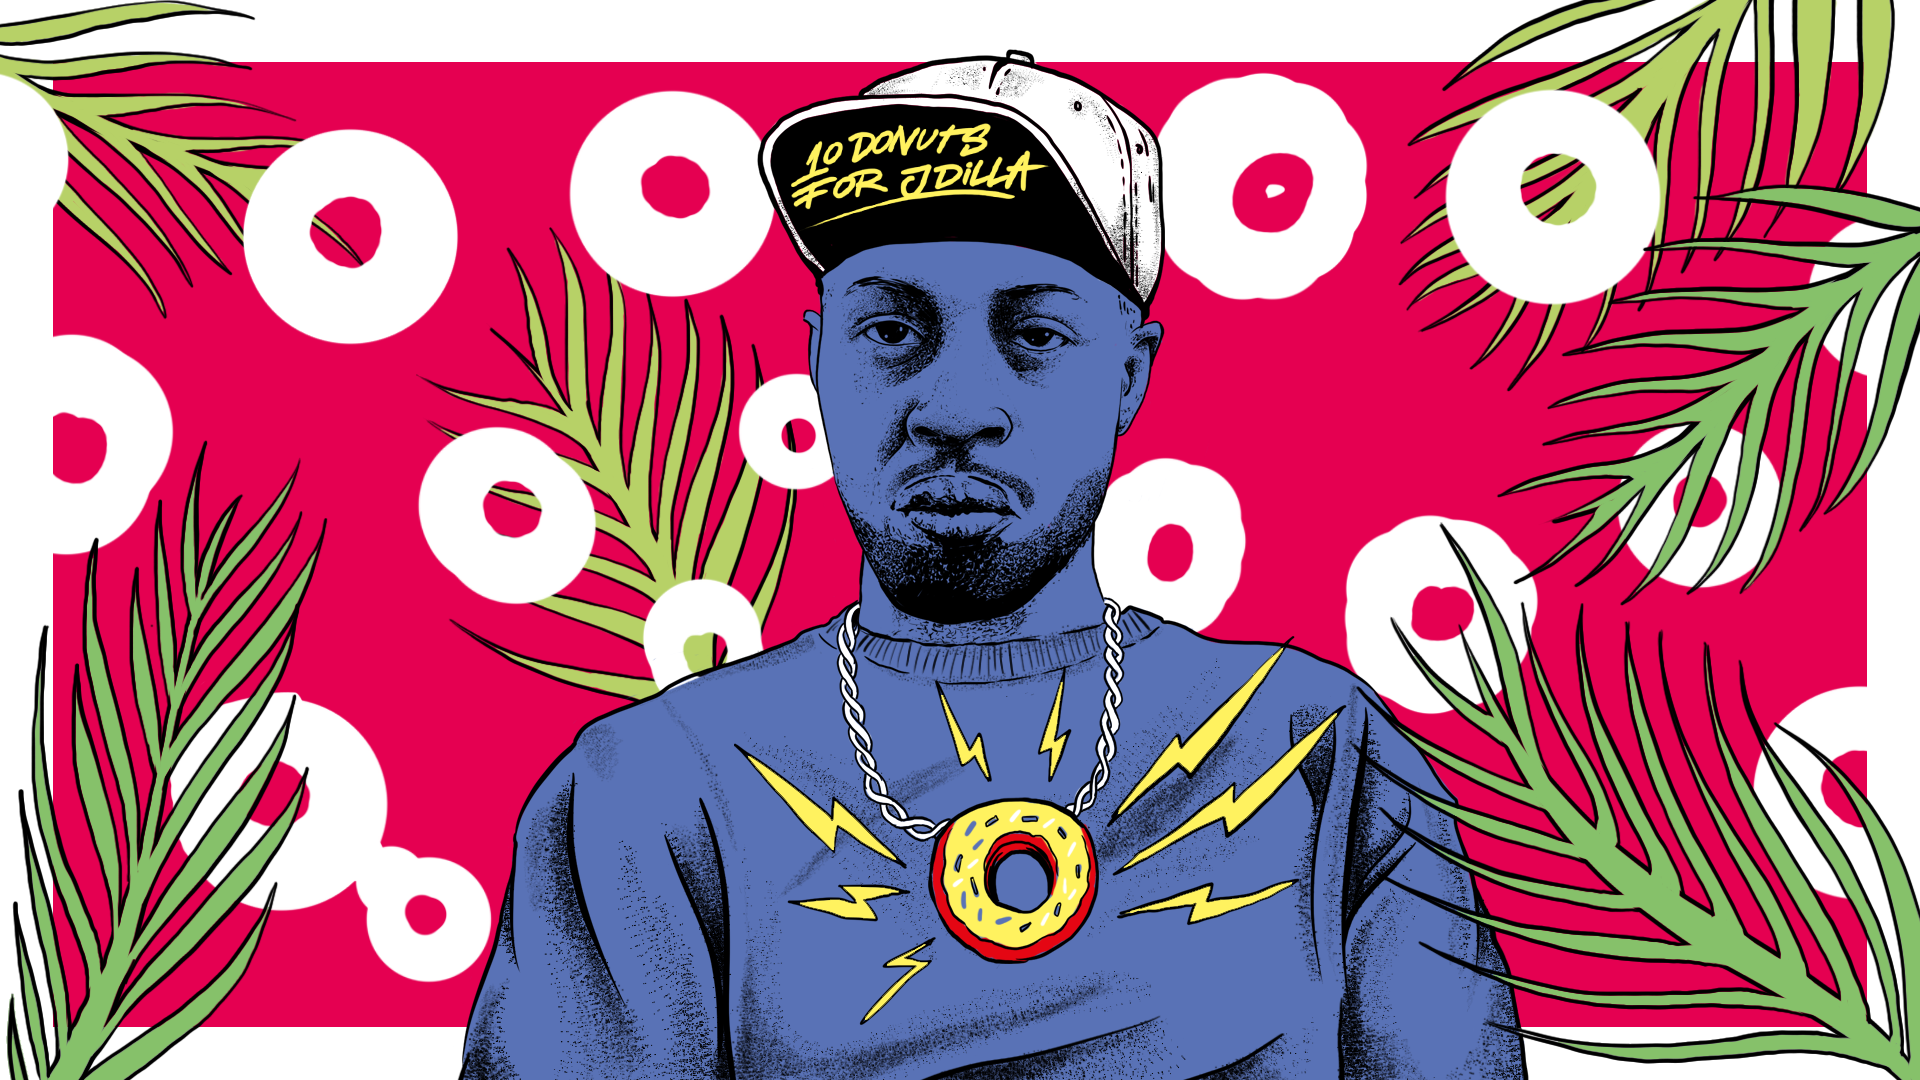 10 Donuts For J Dilla Is An Audiovisual Tribute 2 Jay - Poster , HD Wallpaper & Backgrounds